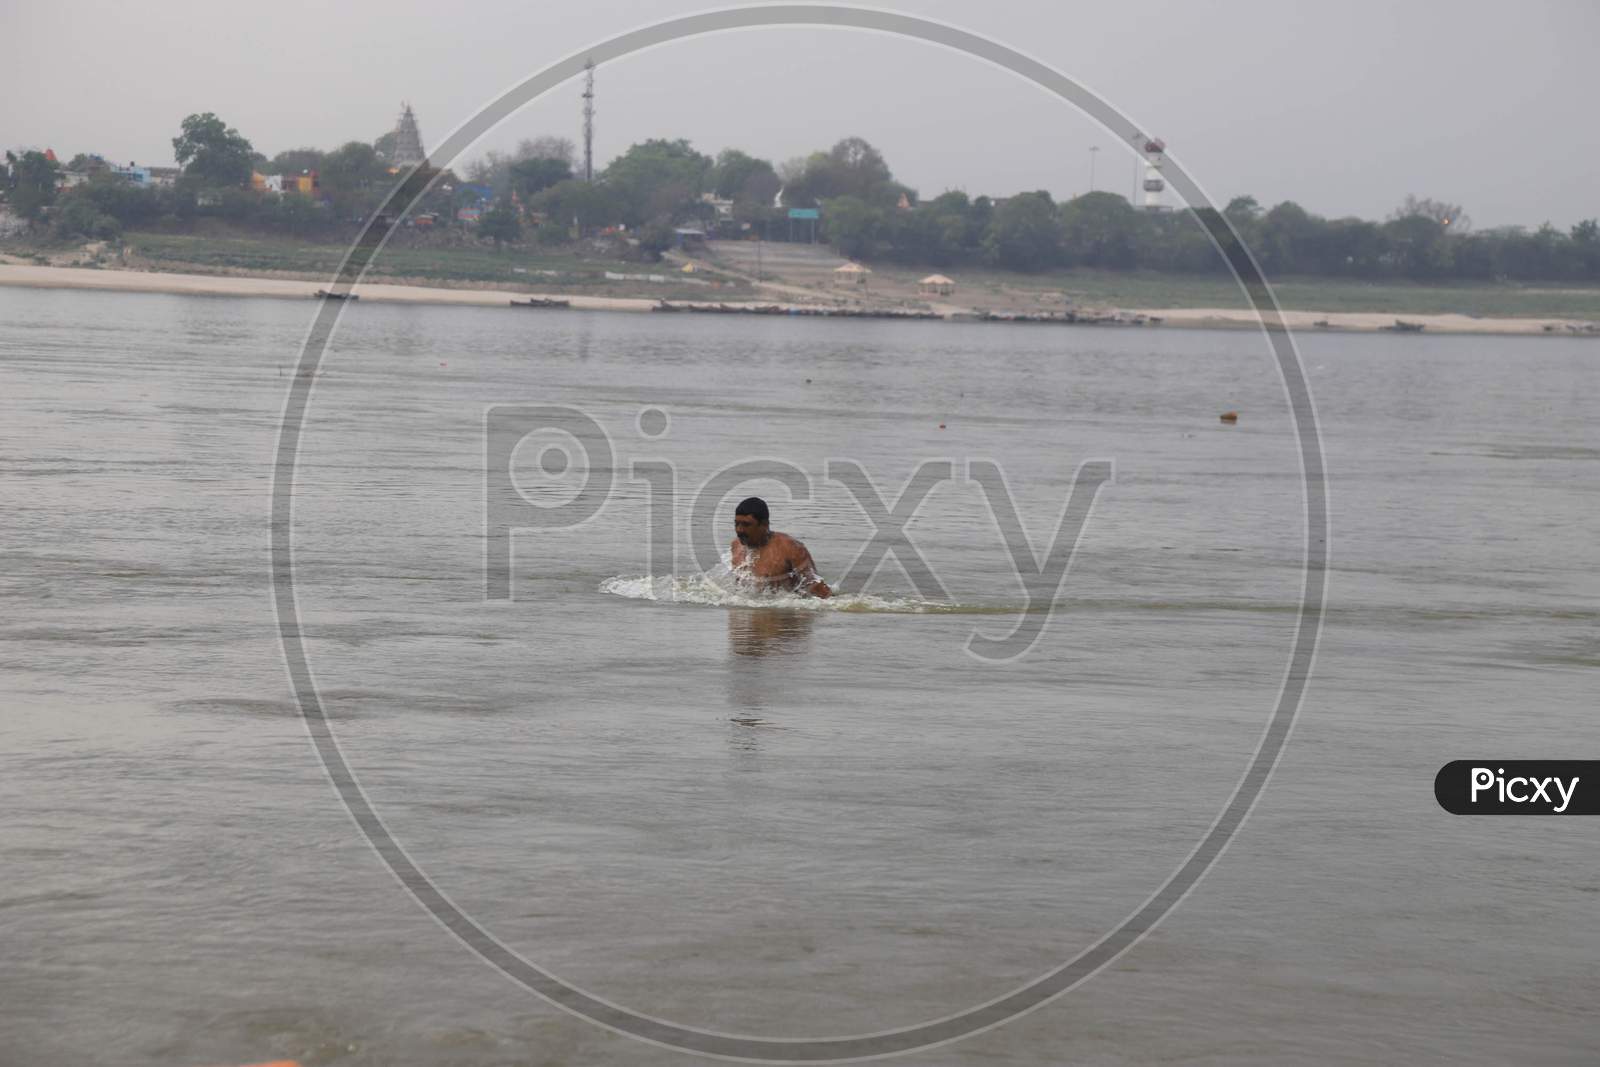 A Man Takes Holy Dip In The Clean Water Of Sangam, Confluence Of Three Water Of Ganga Yamuna And Mythical Saraswati During A 21-Day Nationwide Lockdown To Slow The Spreading Of Coronavirus Disease (Covid-19) In Prayagraj, April 9, 2020.